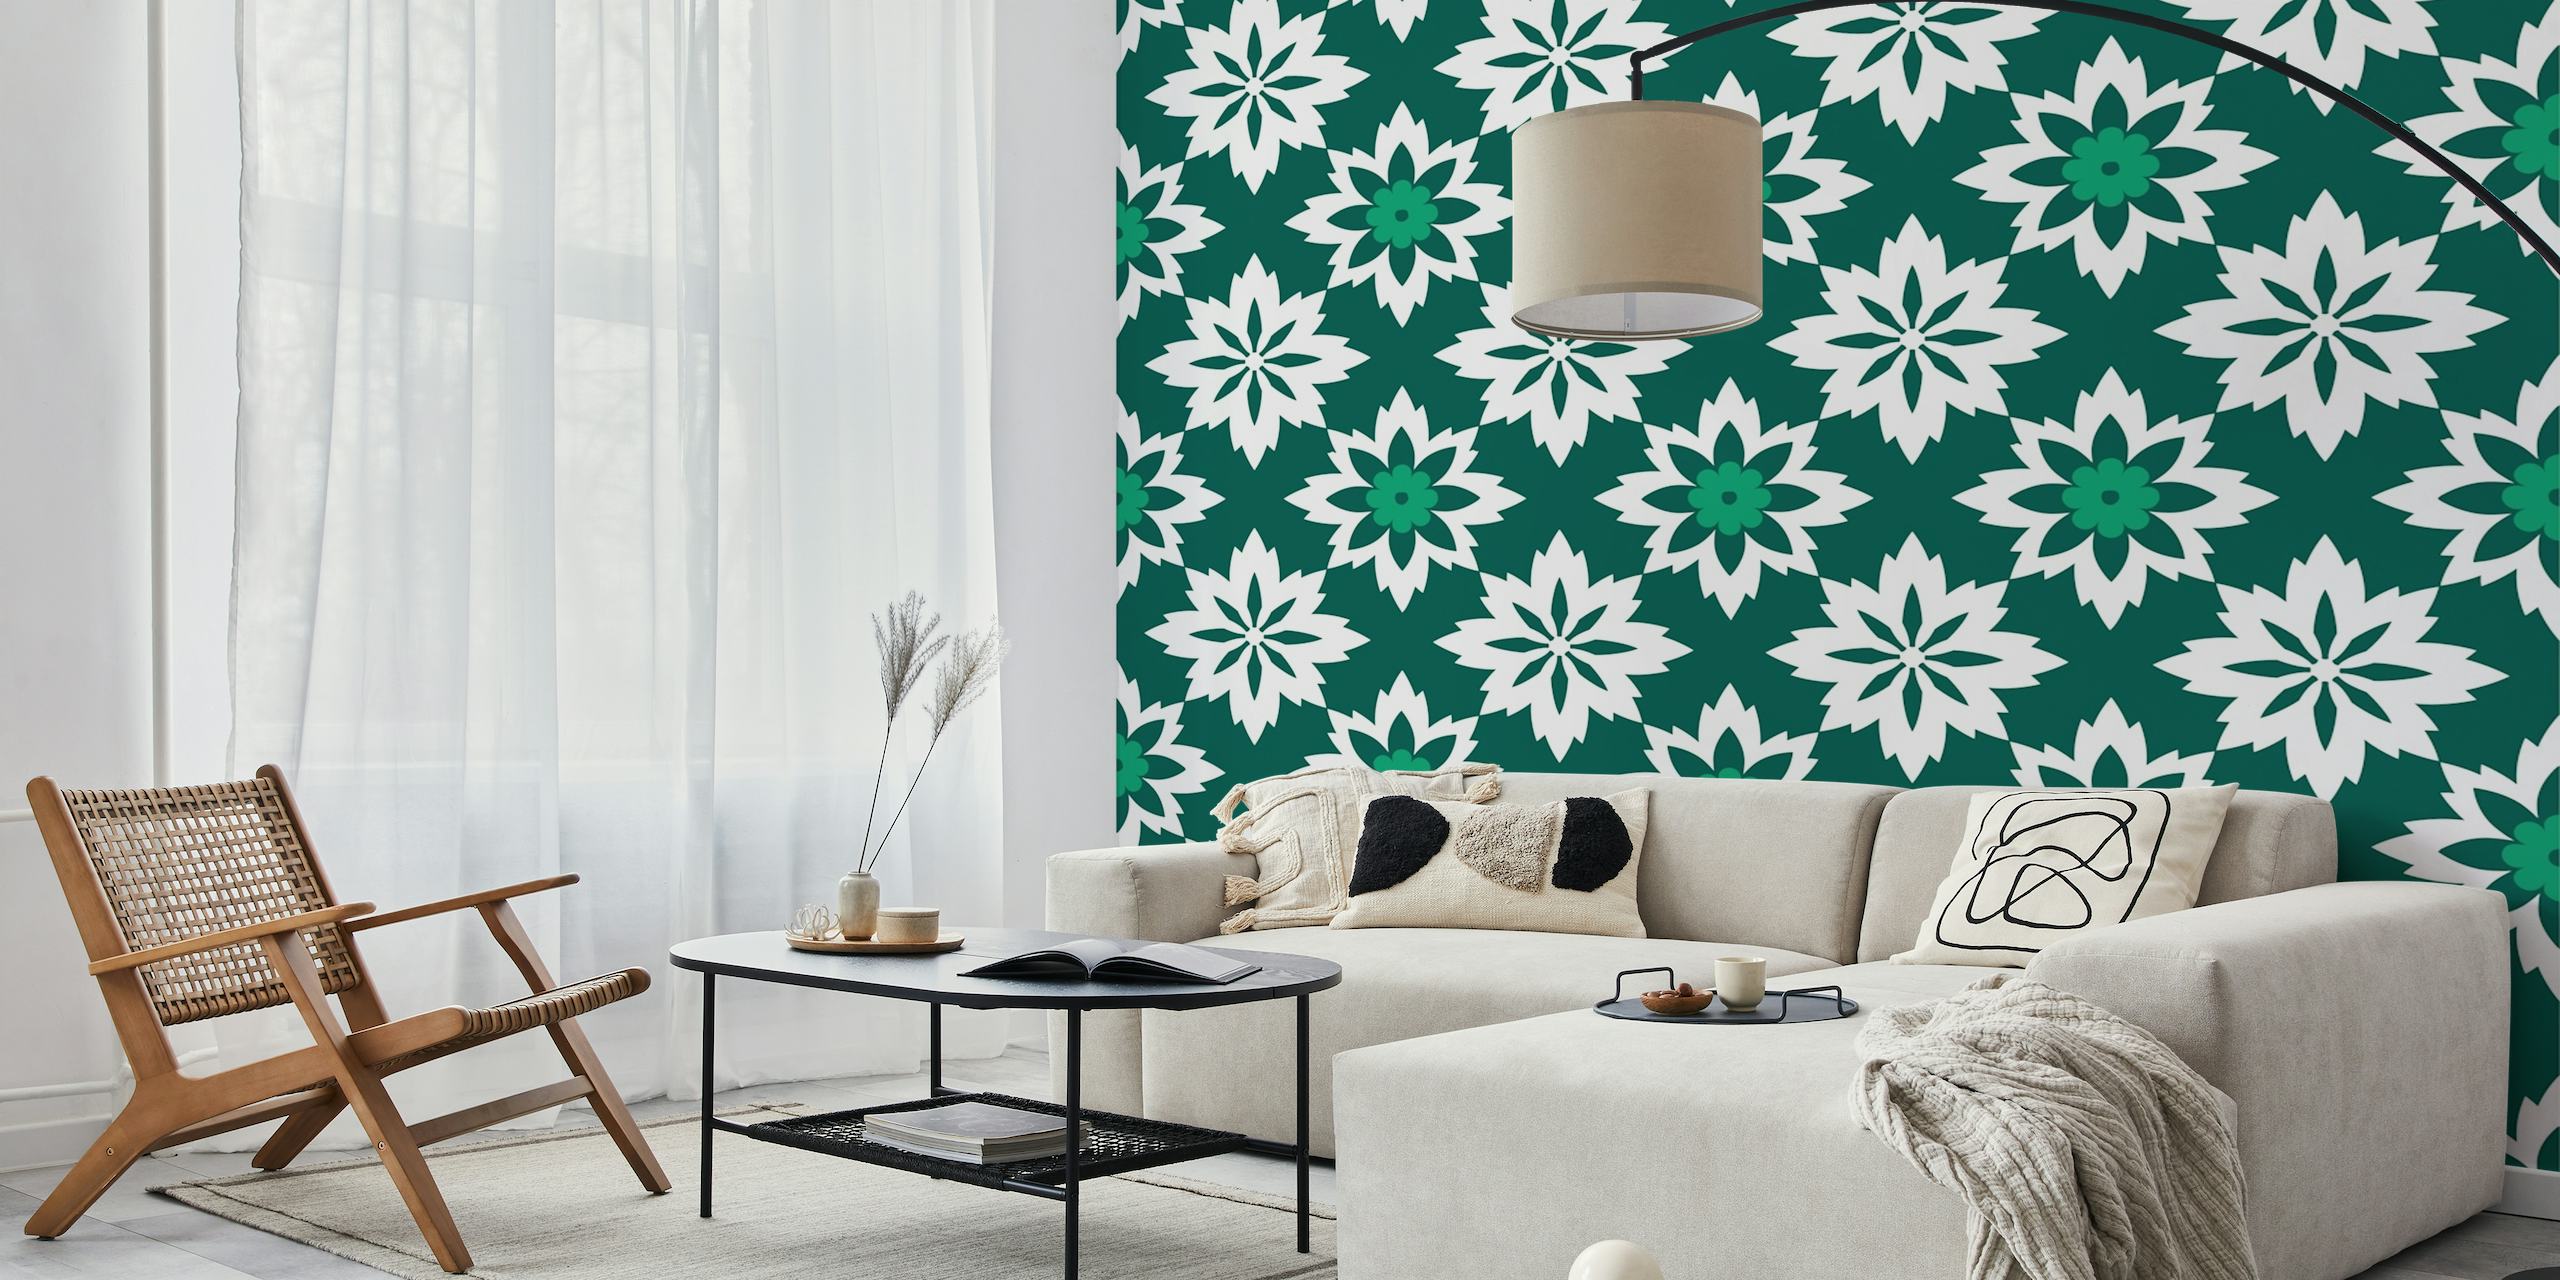 Morrocan abstract floral pattern forest green behang